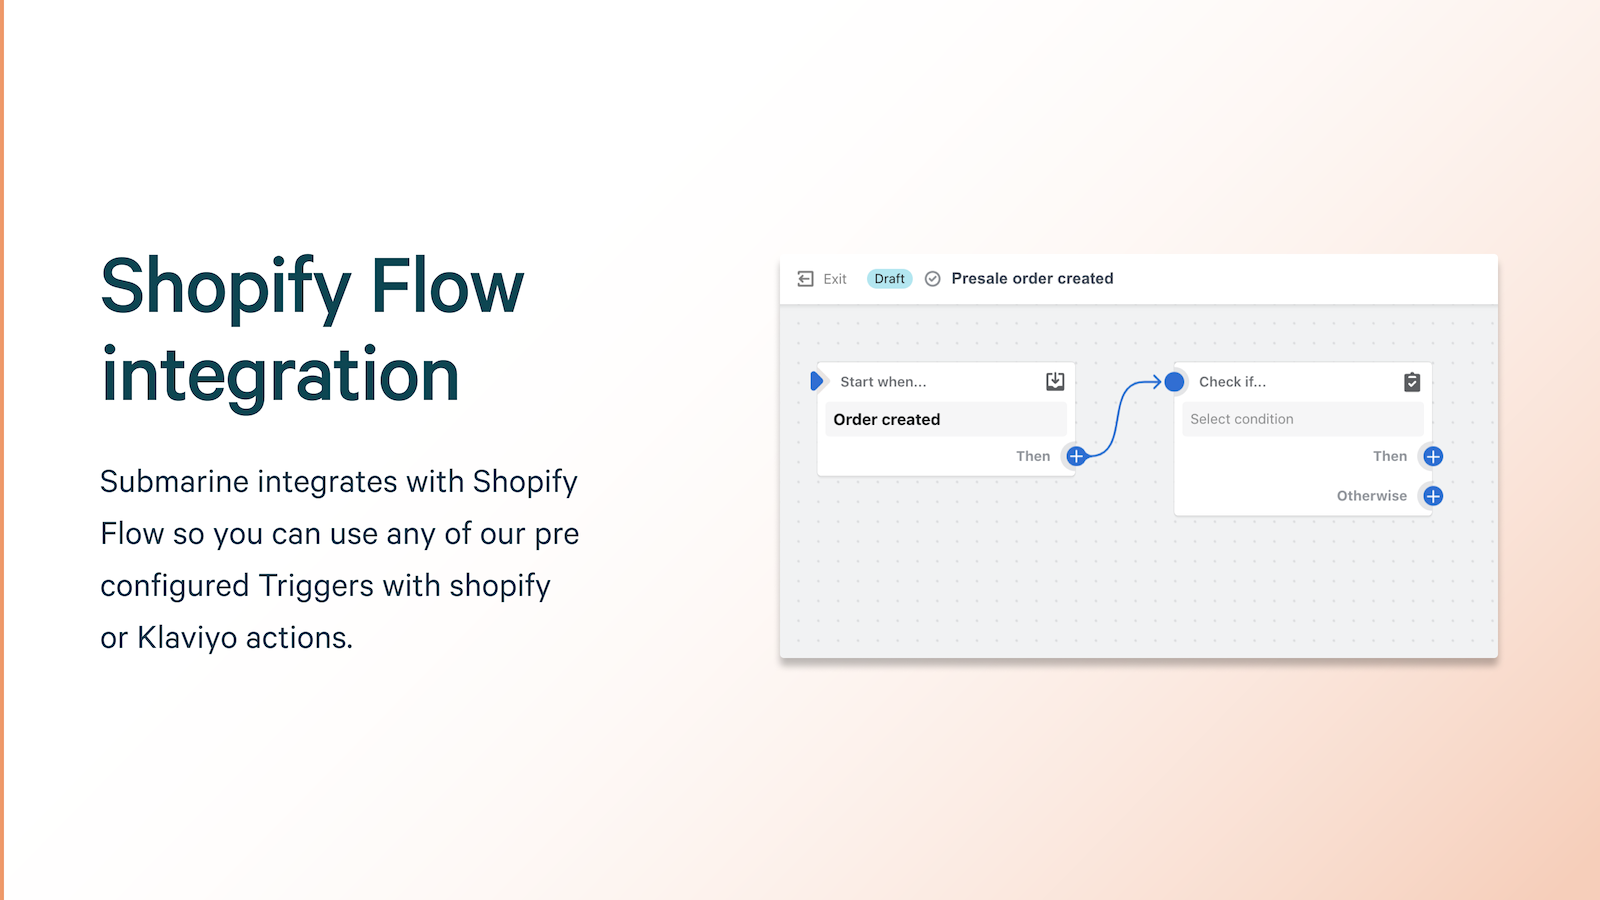 Shopify Flow integration text, screen grab from flow app